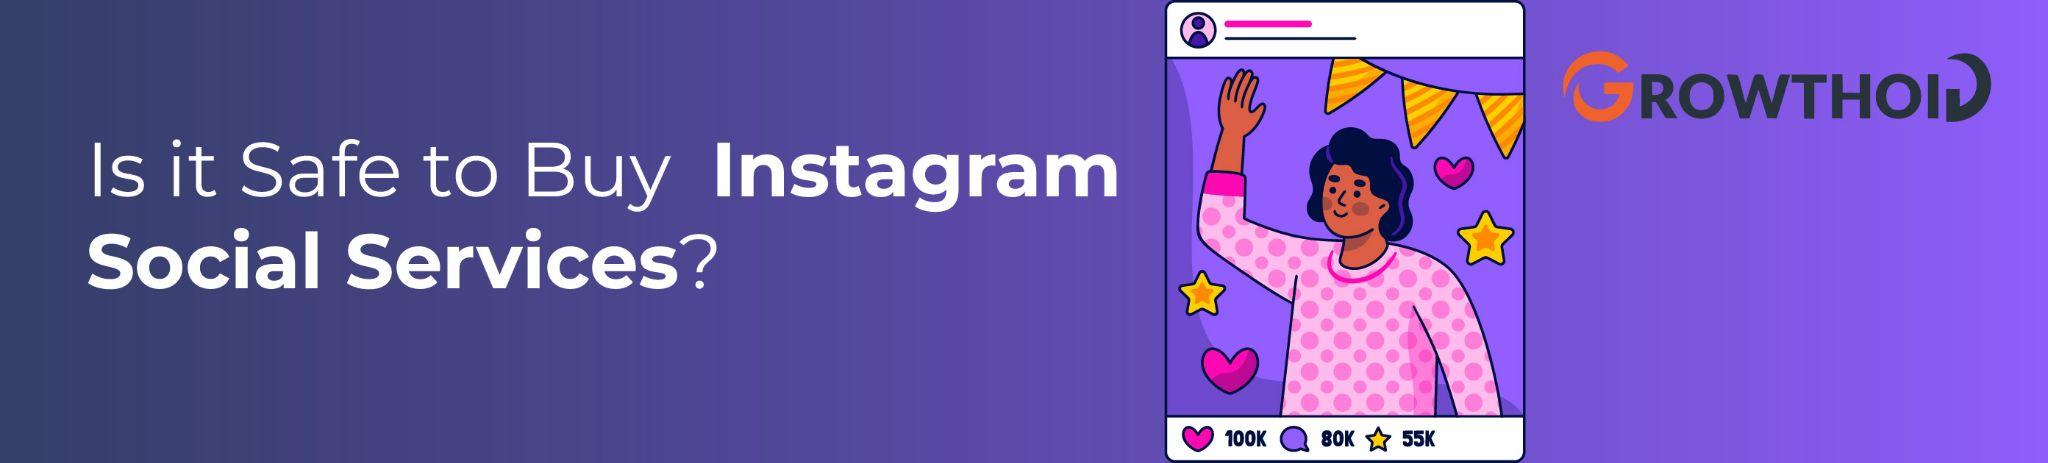 Is it Safe to Buy Instagram Social Services?